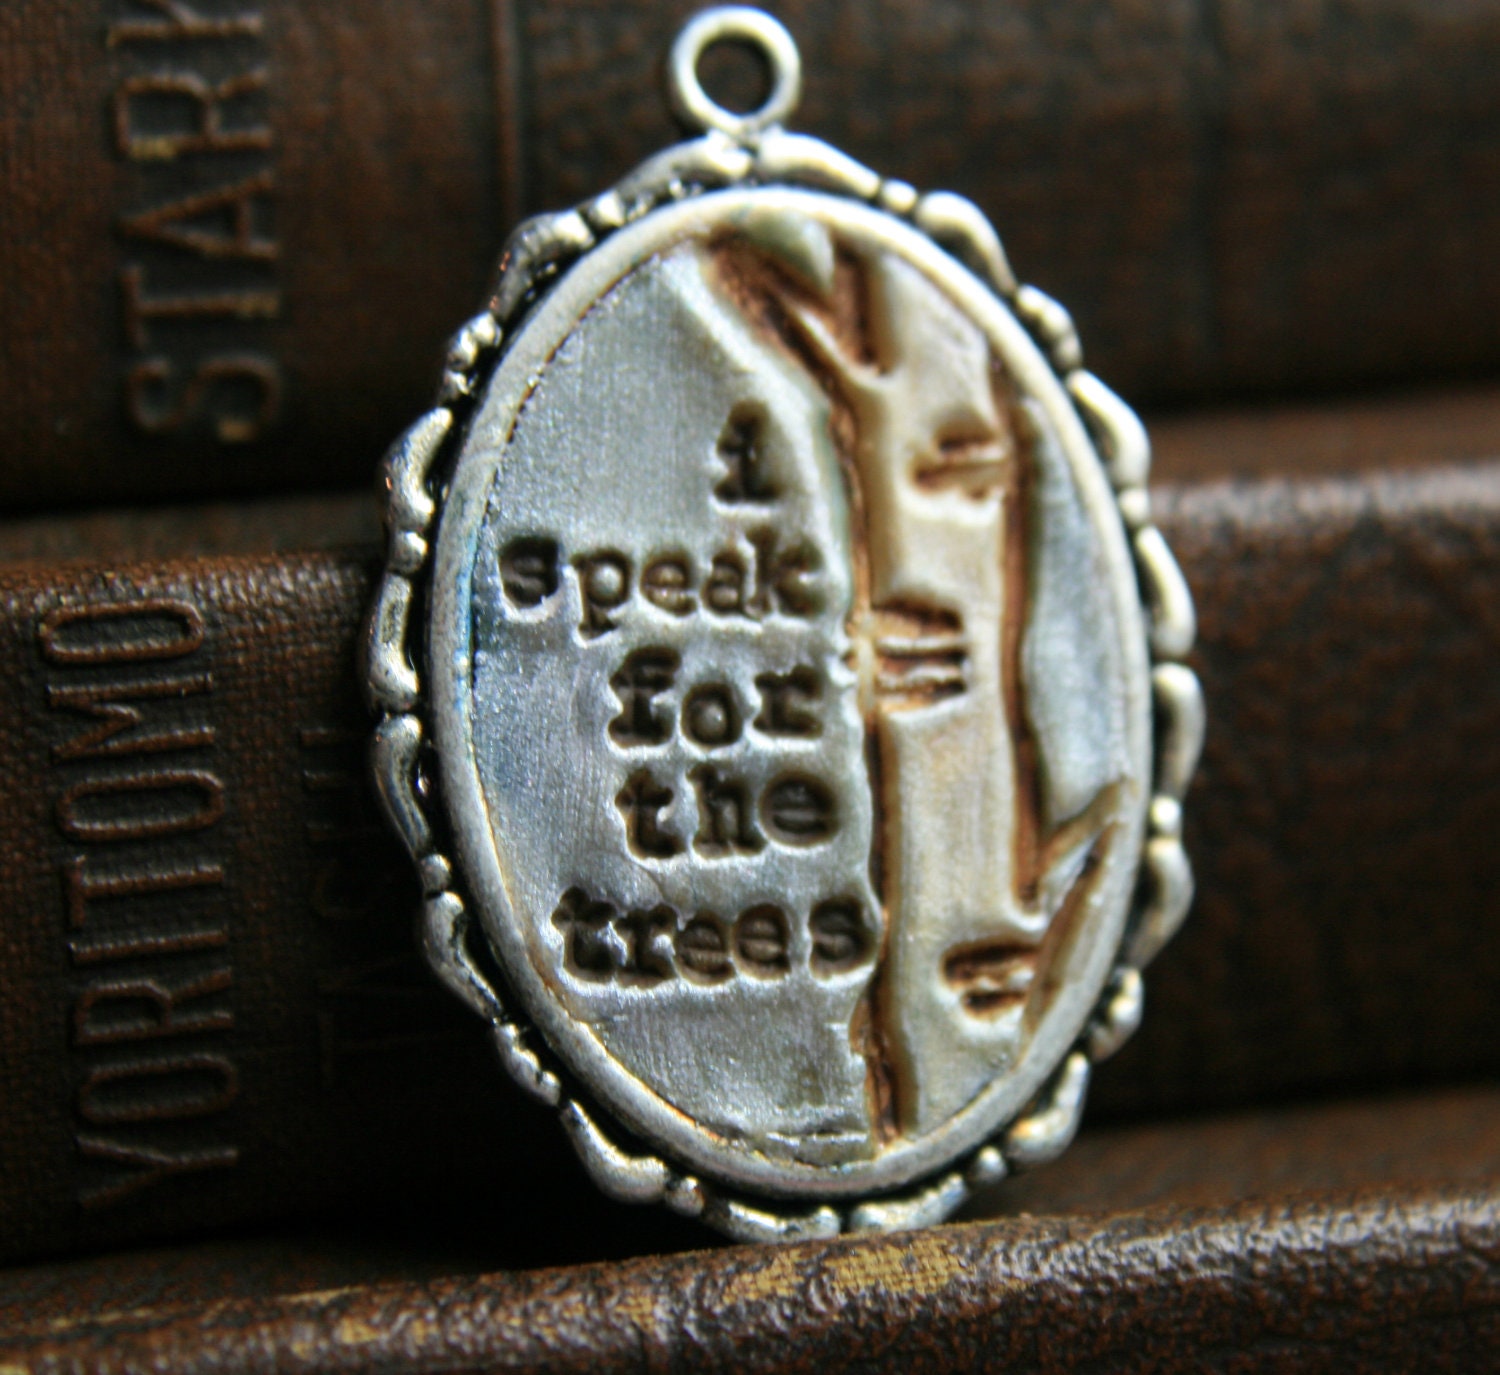 forest finery - i speak for the trees - limited edition - simple truths pendant - TesoriTrovati